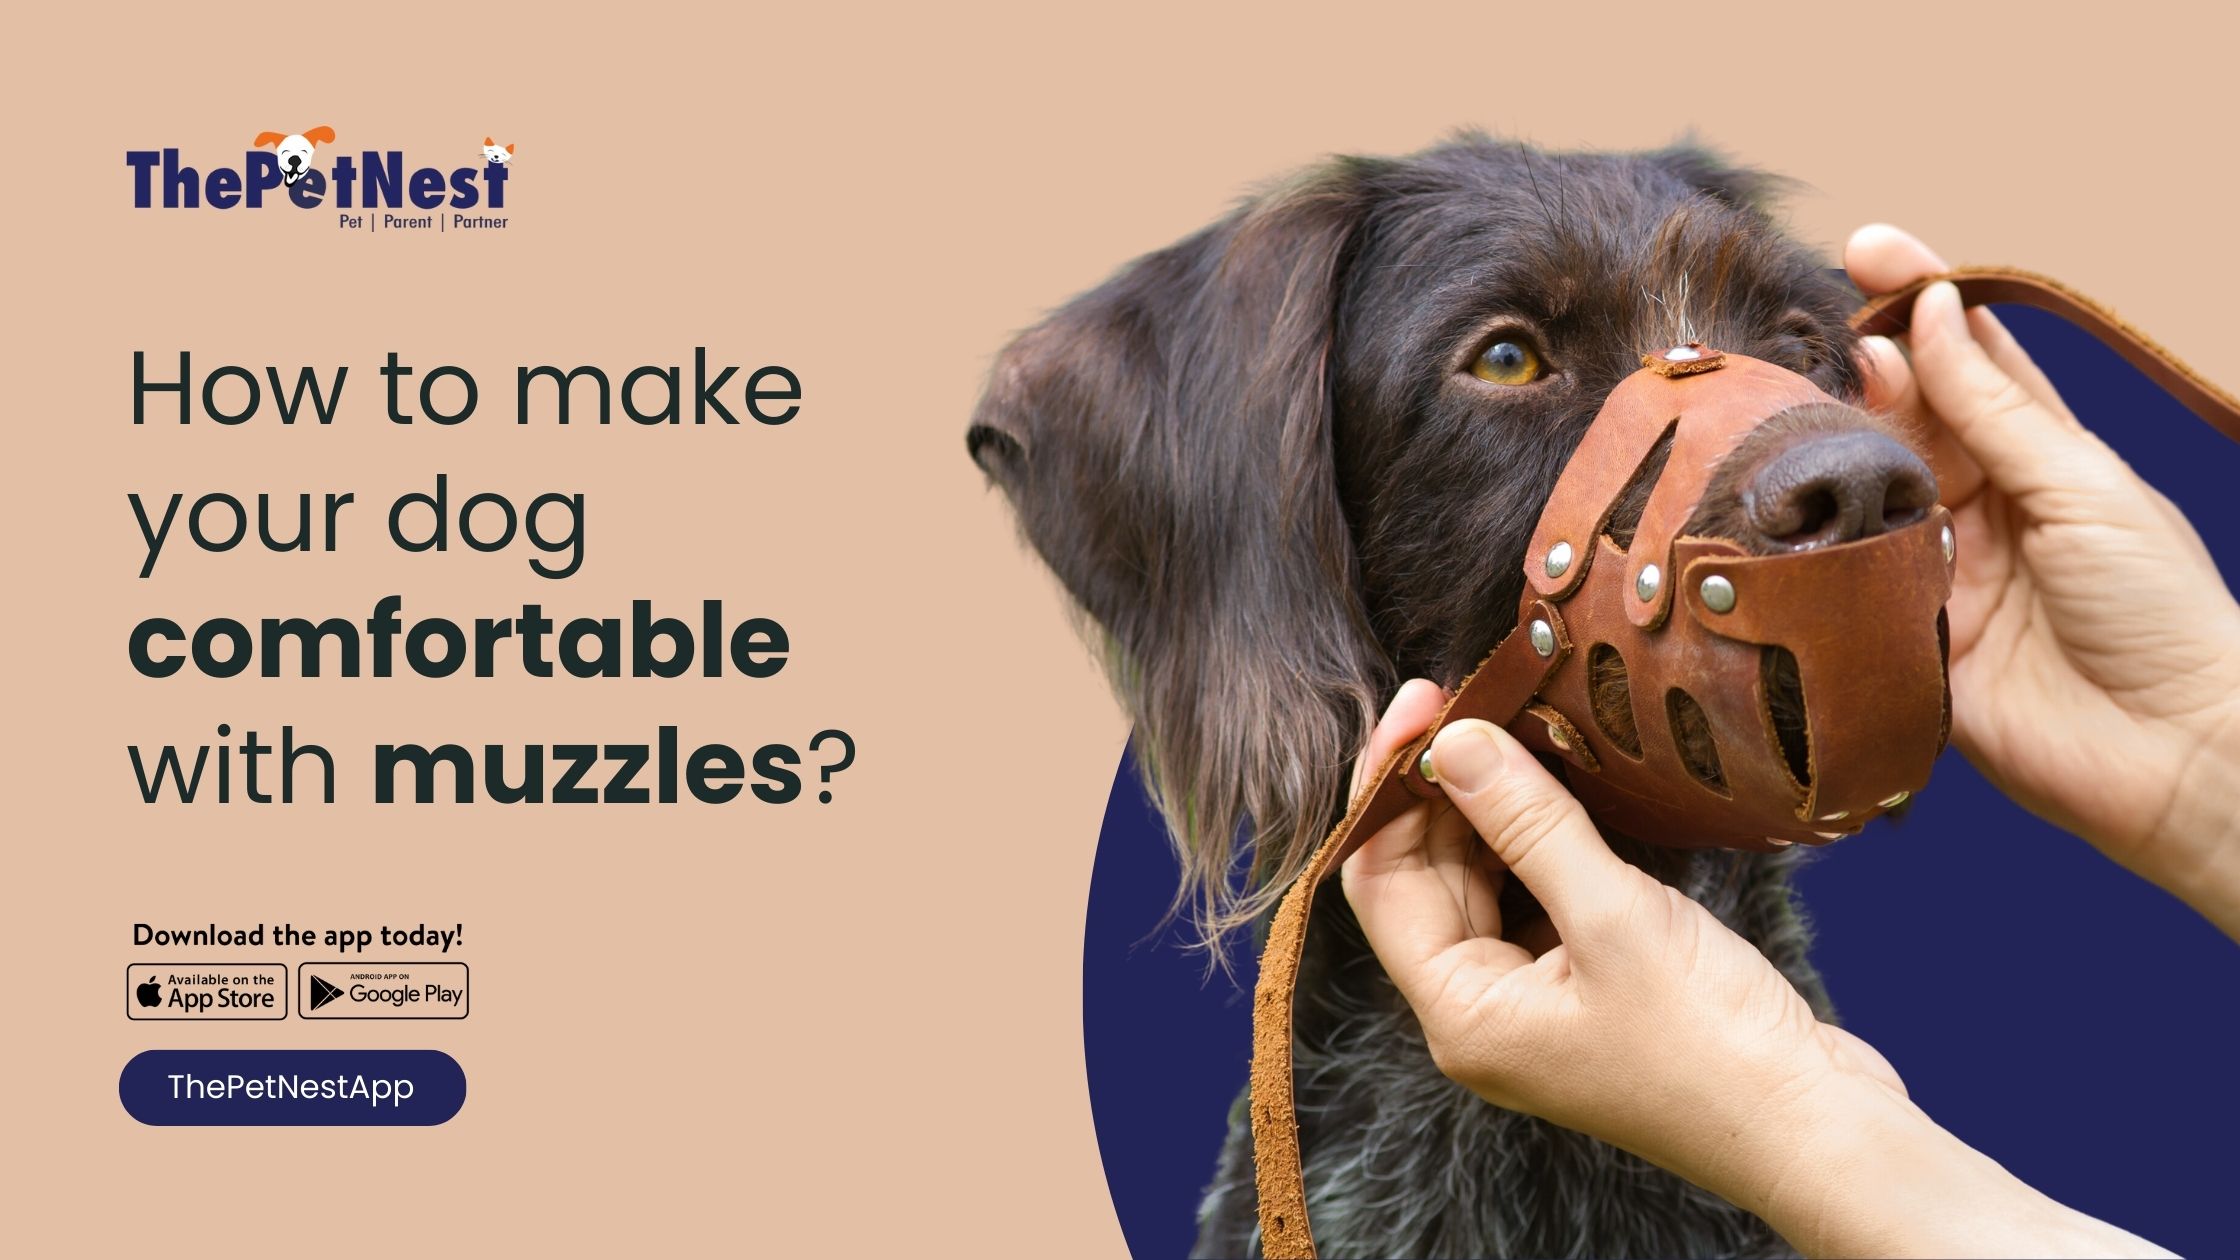 How to make your dog comfortable with muzzles?